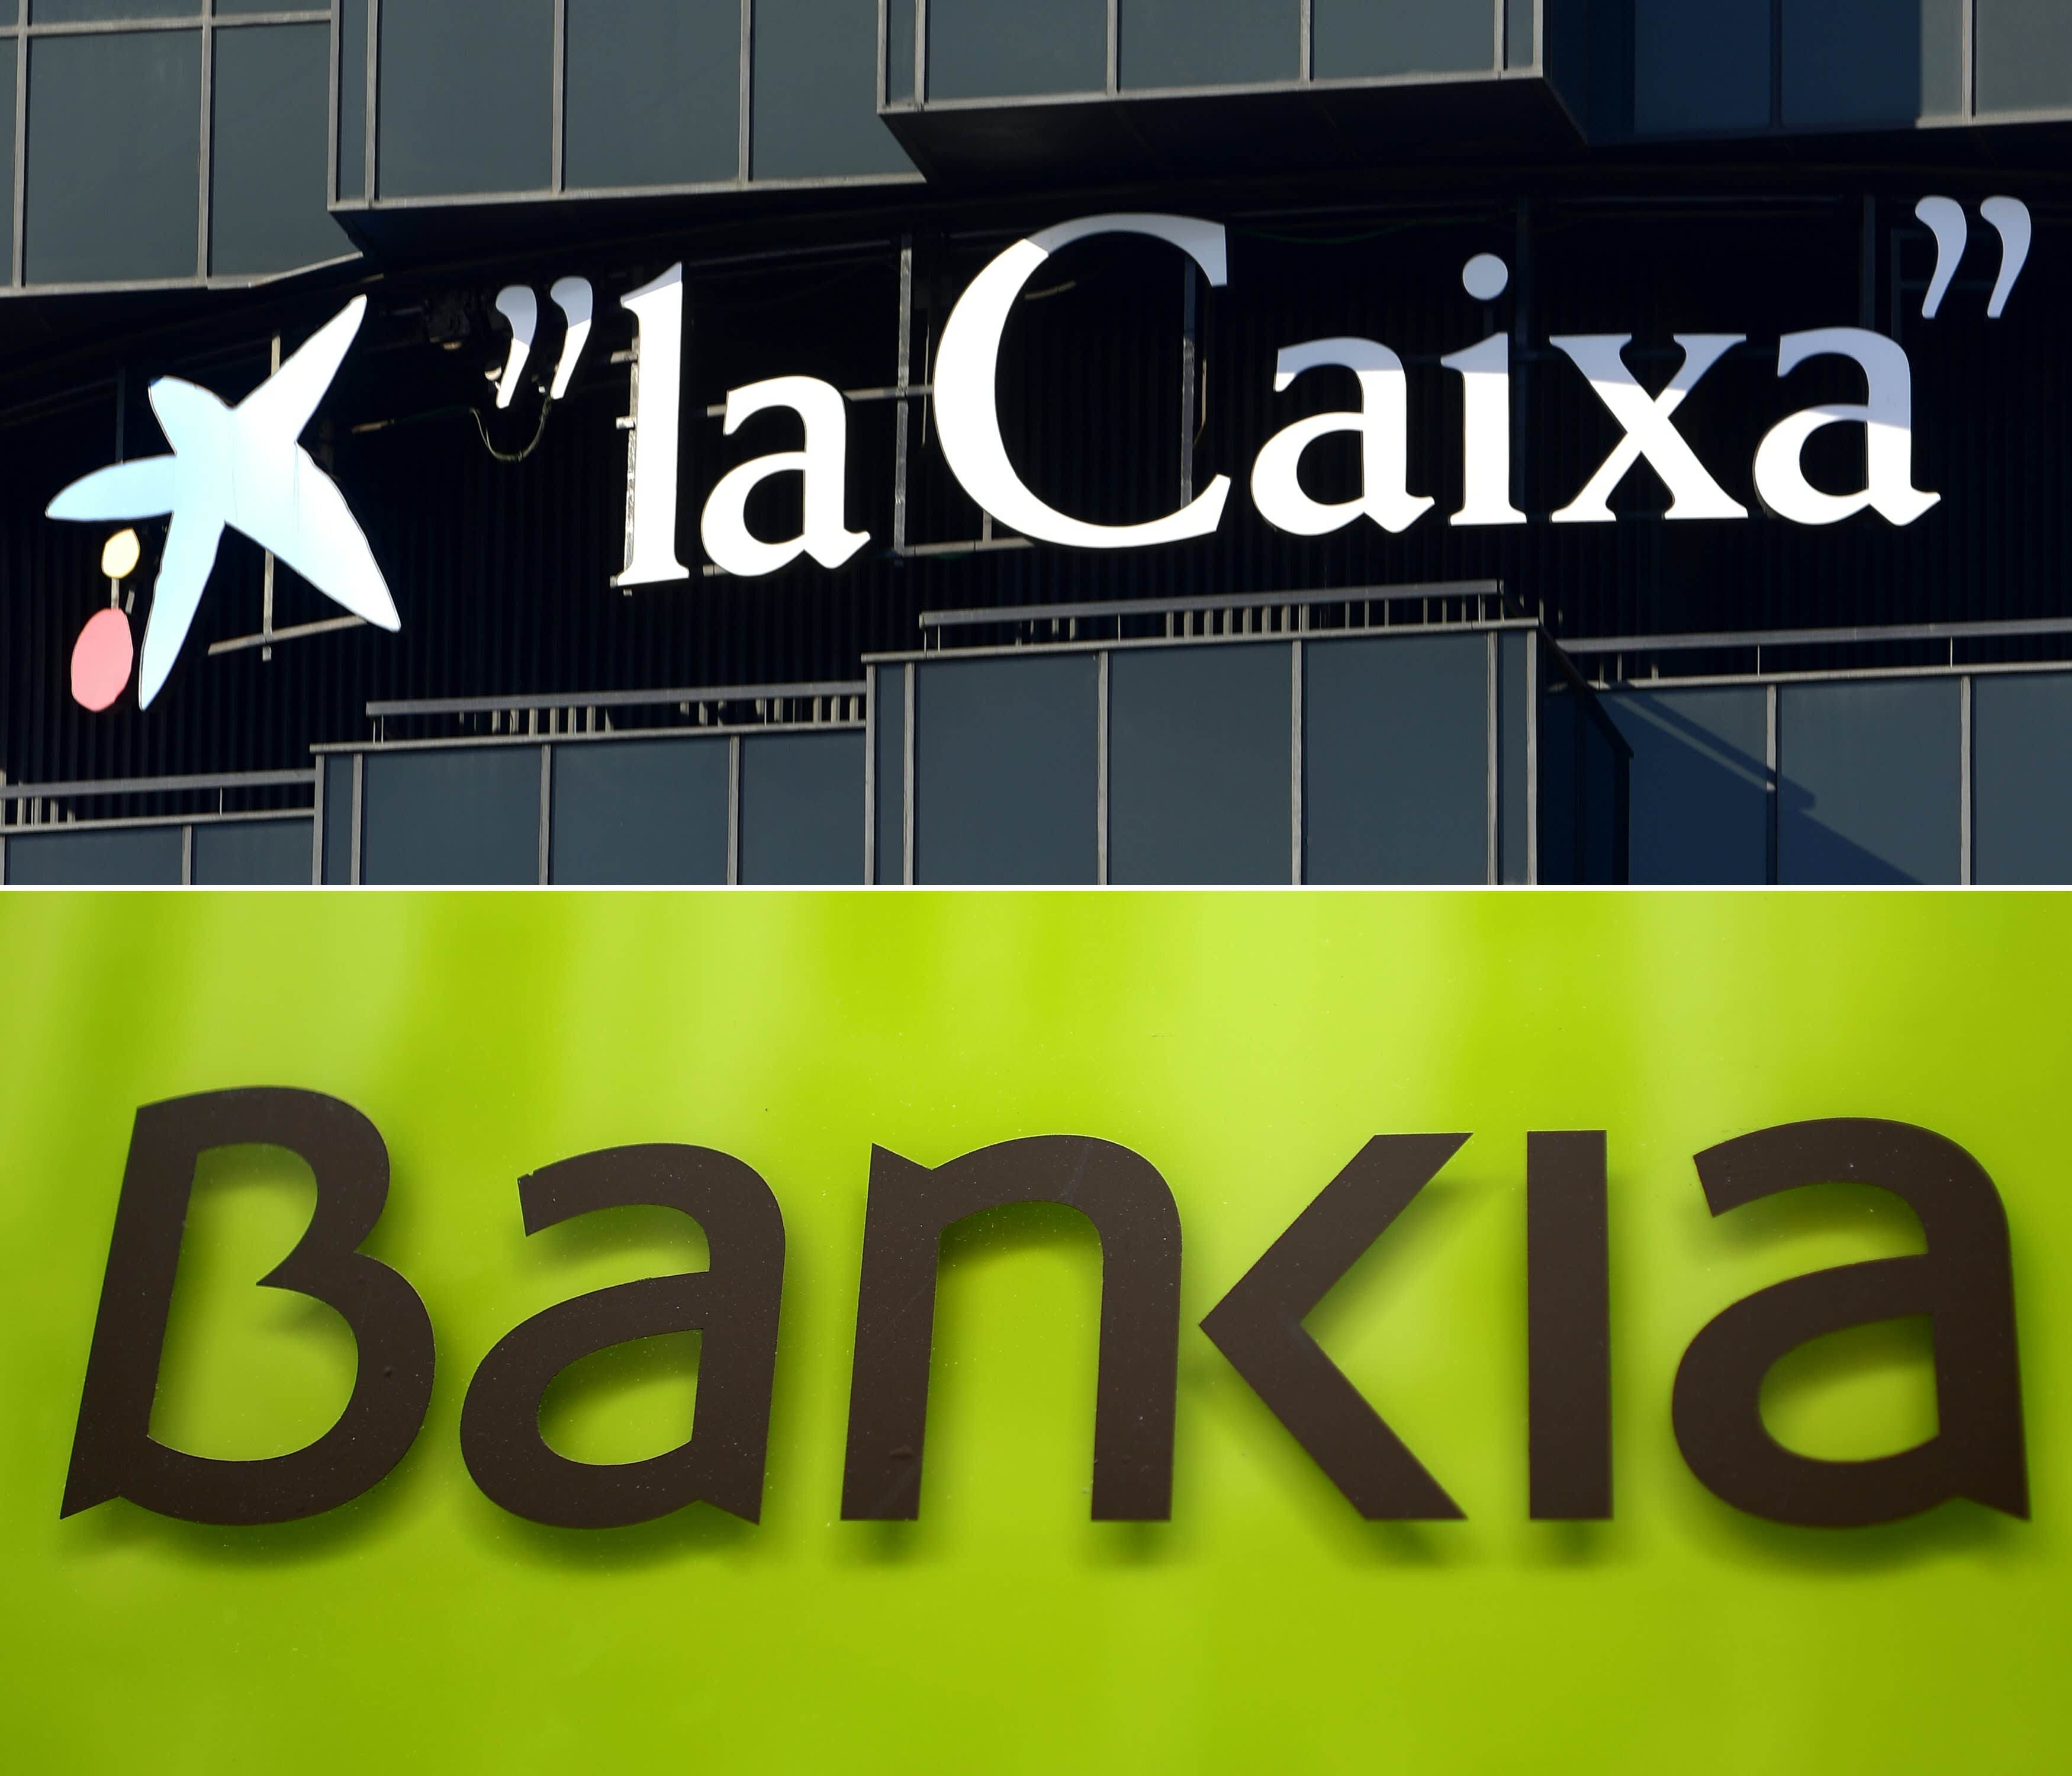 CaixaBank and Bankia to merge, creating Spain’s largest bank thumbnail